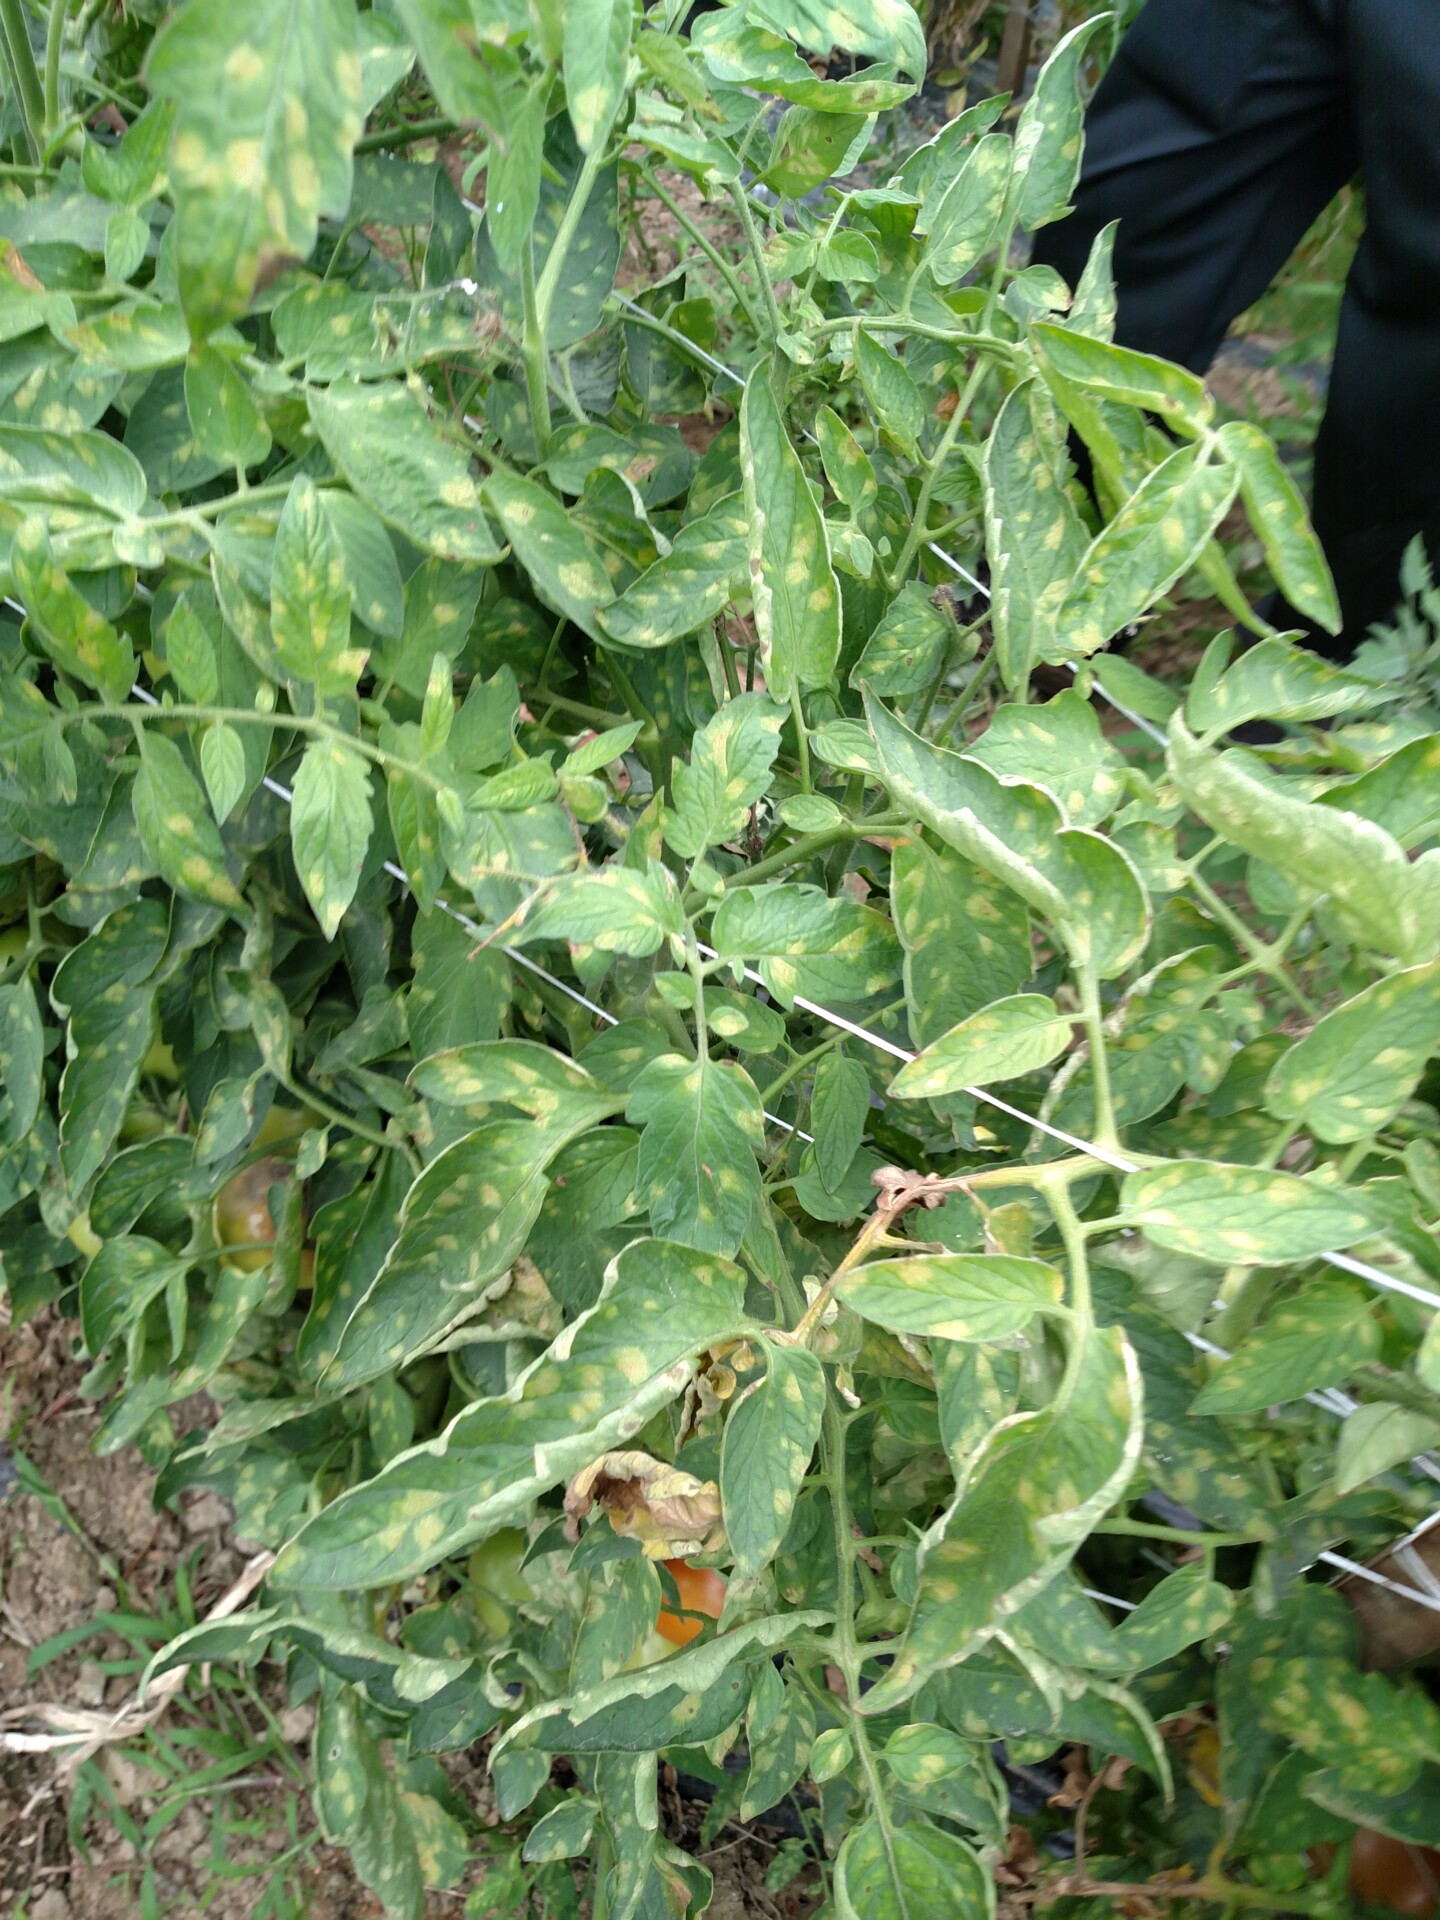 Figure 1. Chlorotic lesions on leaves caused by leaf mold of tomato.